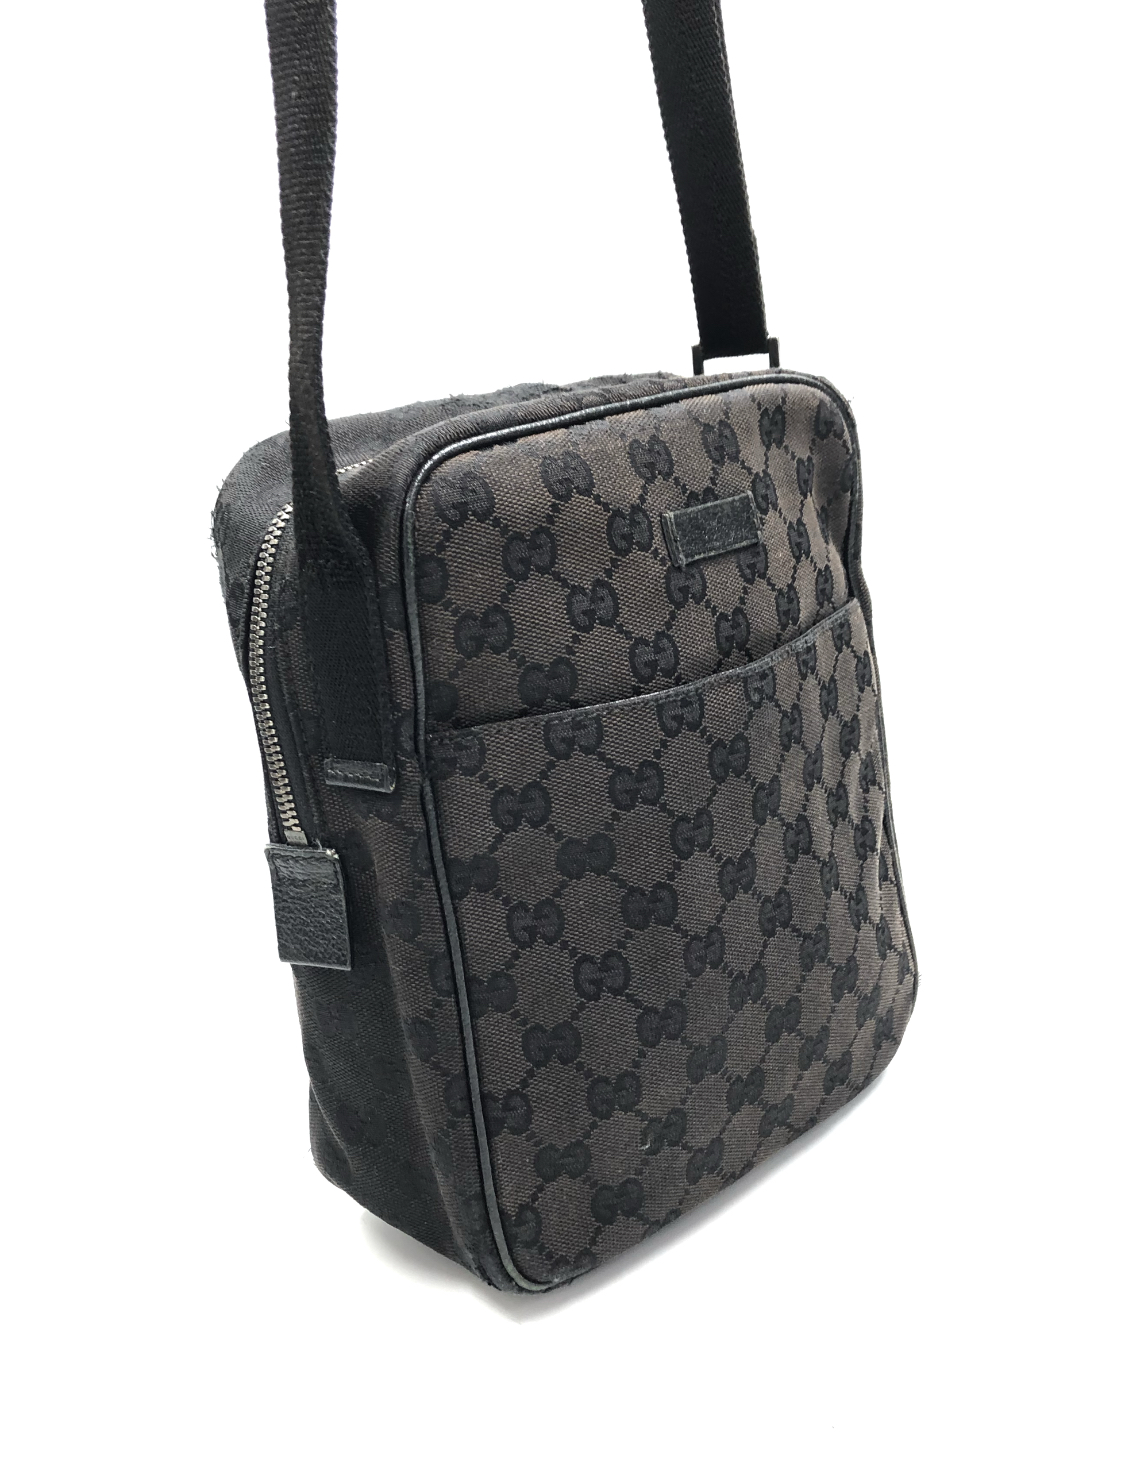 Gucci All Black Side Bag | Literacy Ontario Central South